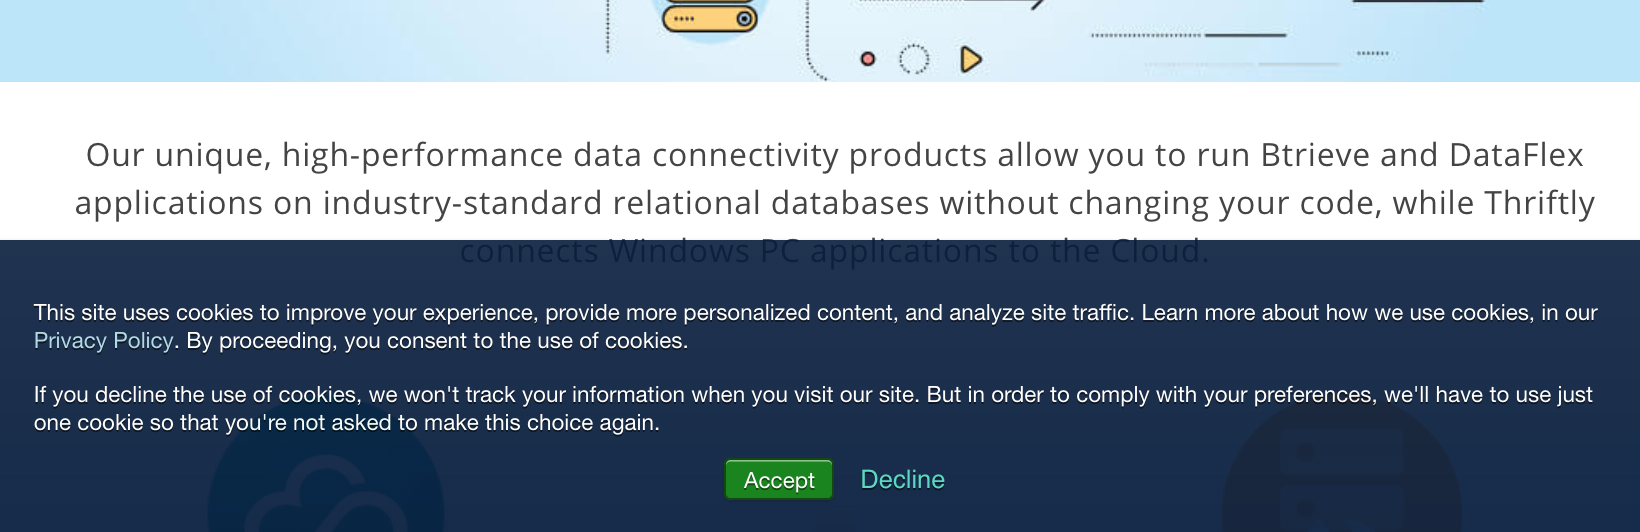 The Mertech cookies notice hyperlinks to our complete Privacy Policy